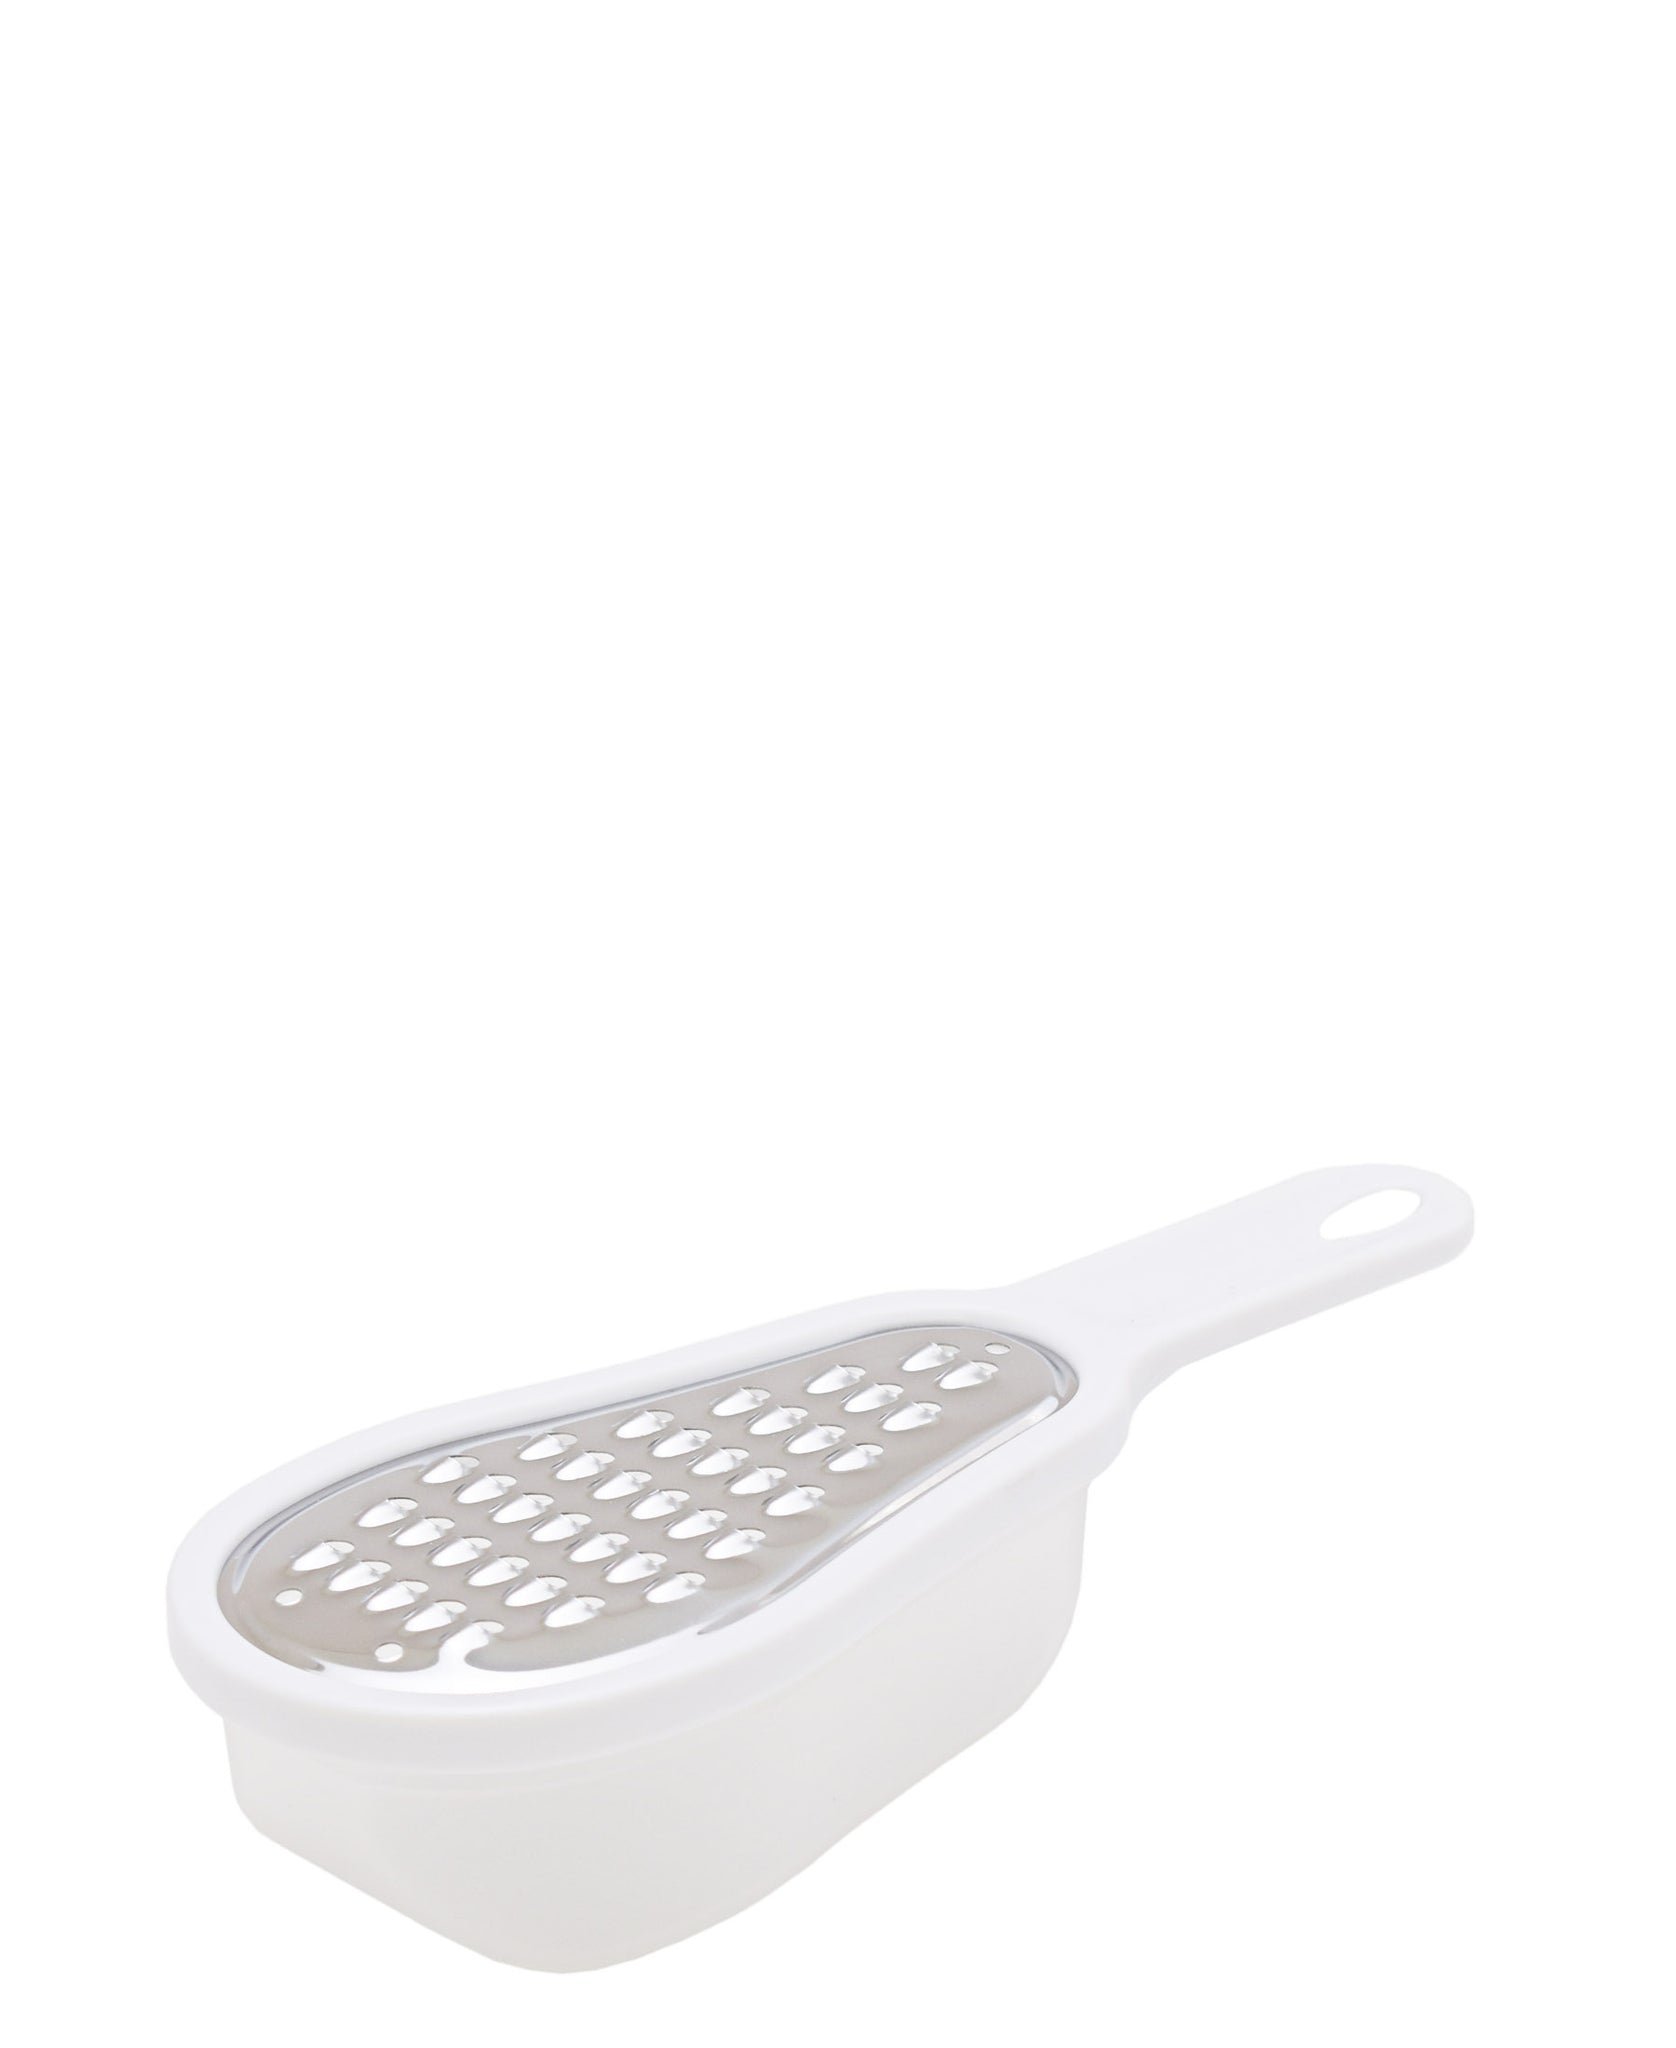 Hillhouse Mini Grater With Container - White